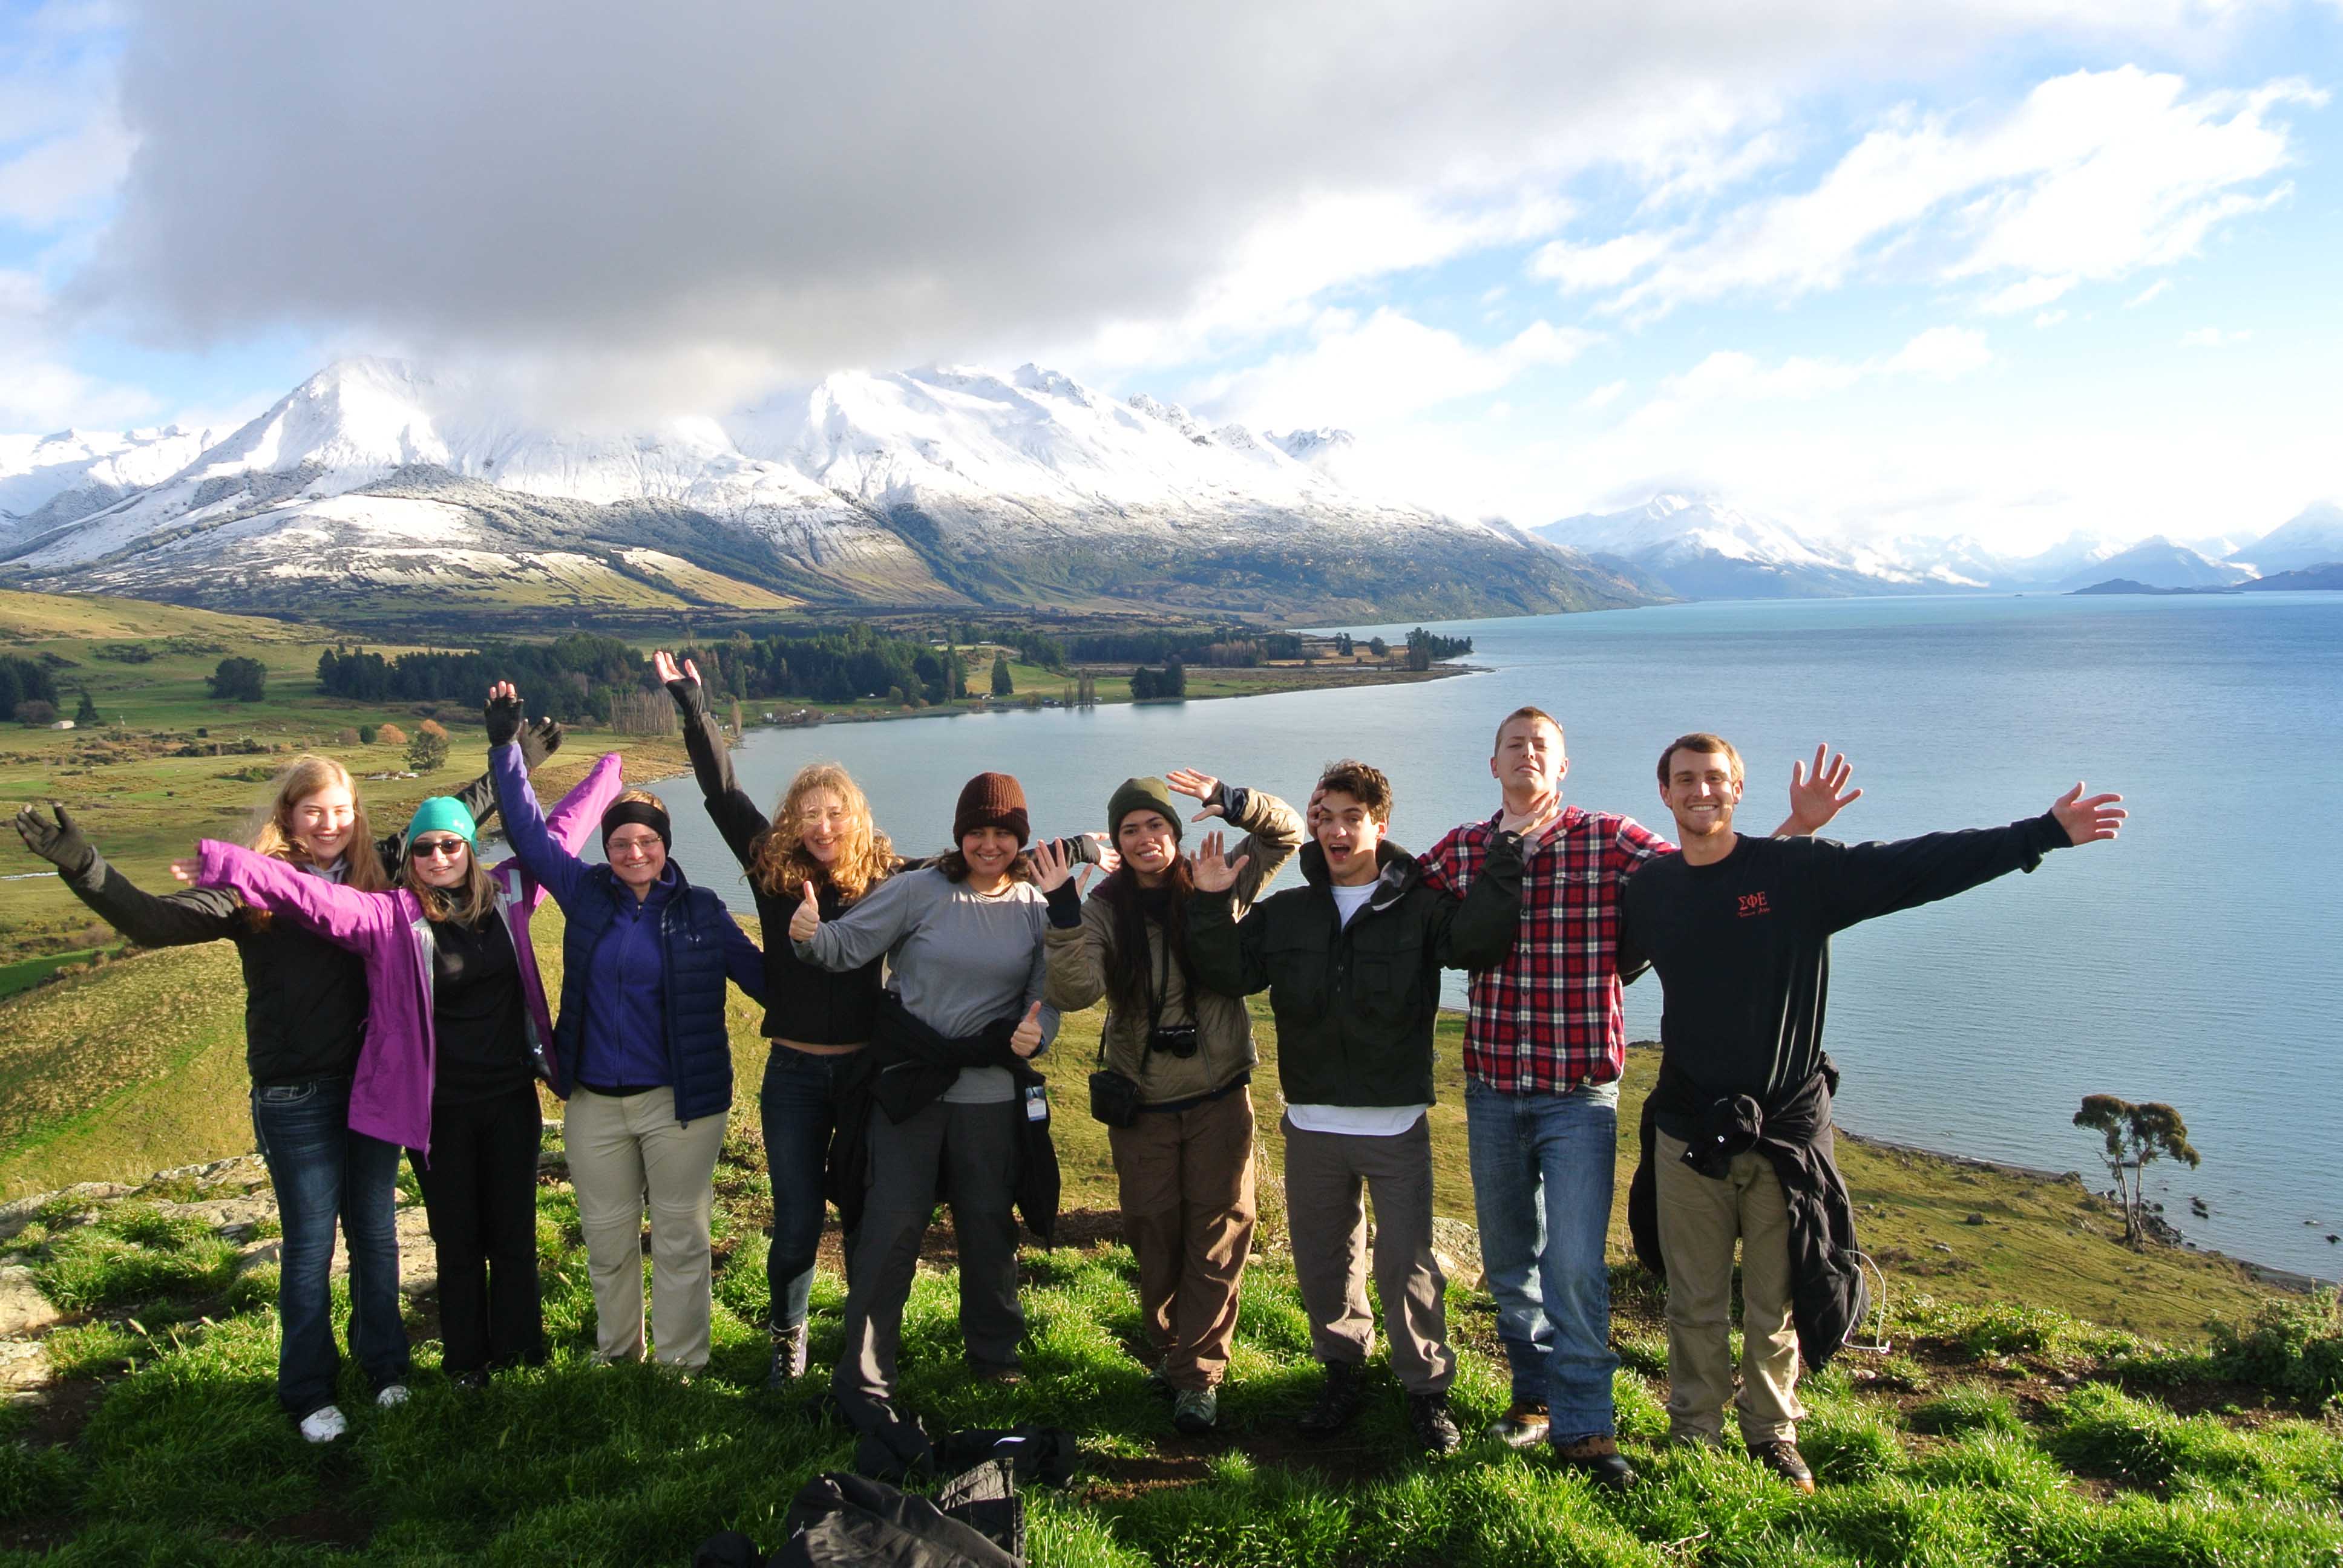 A group of people with their arms spread out enjoying the views in Hawkes Bay, New Zealand.